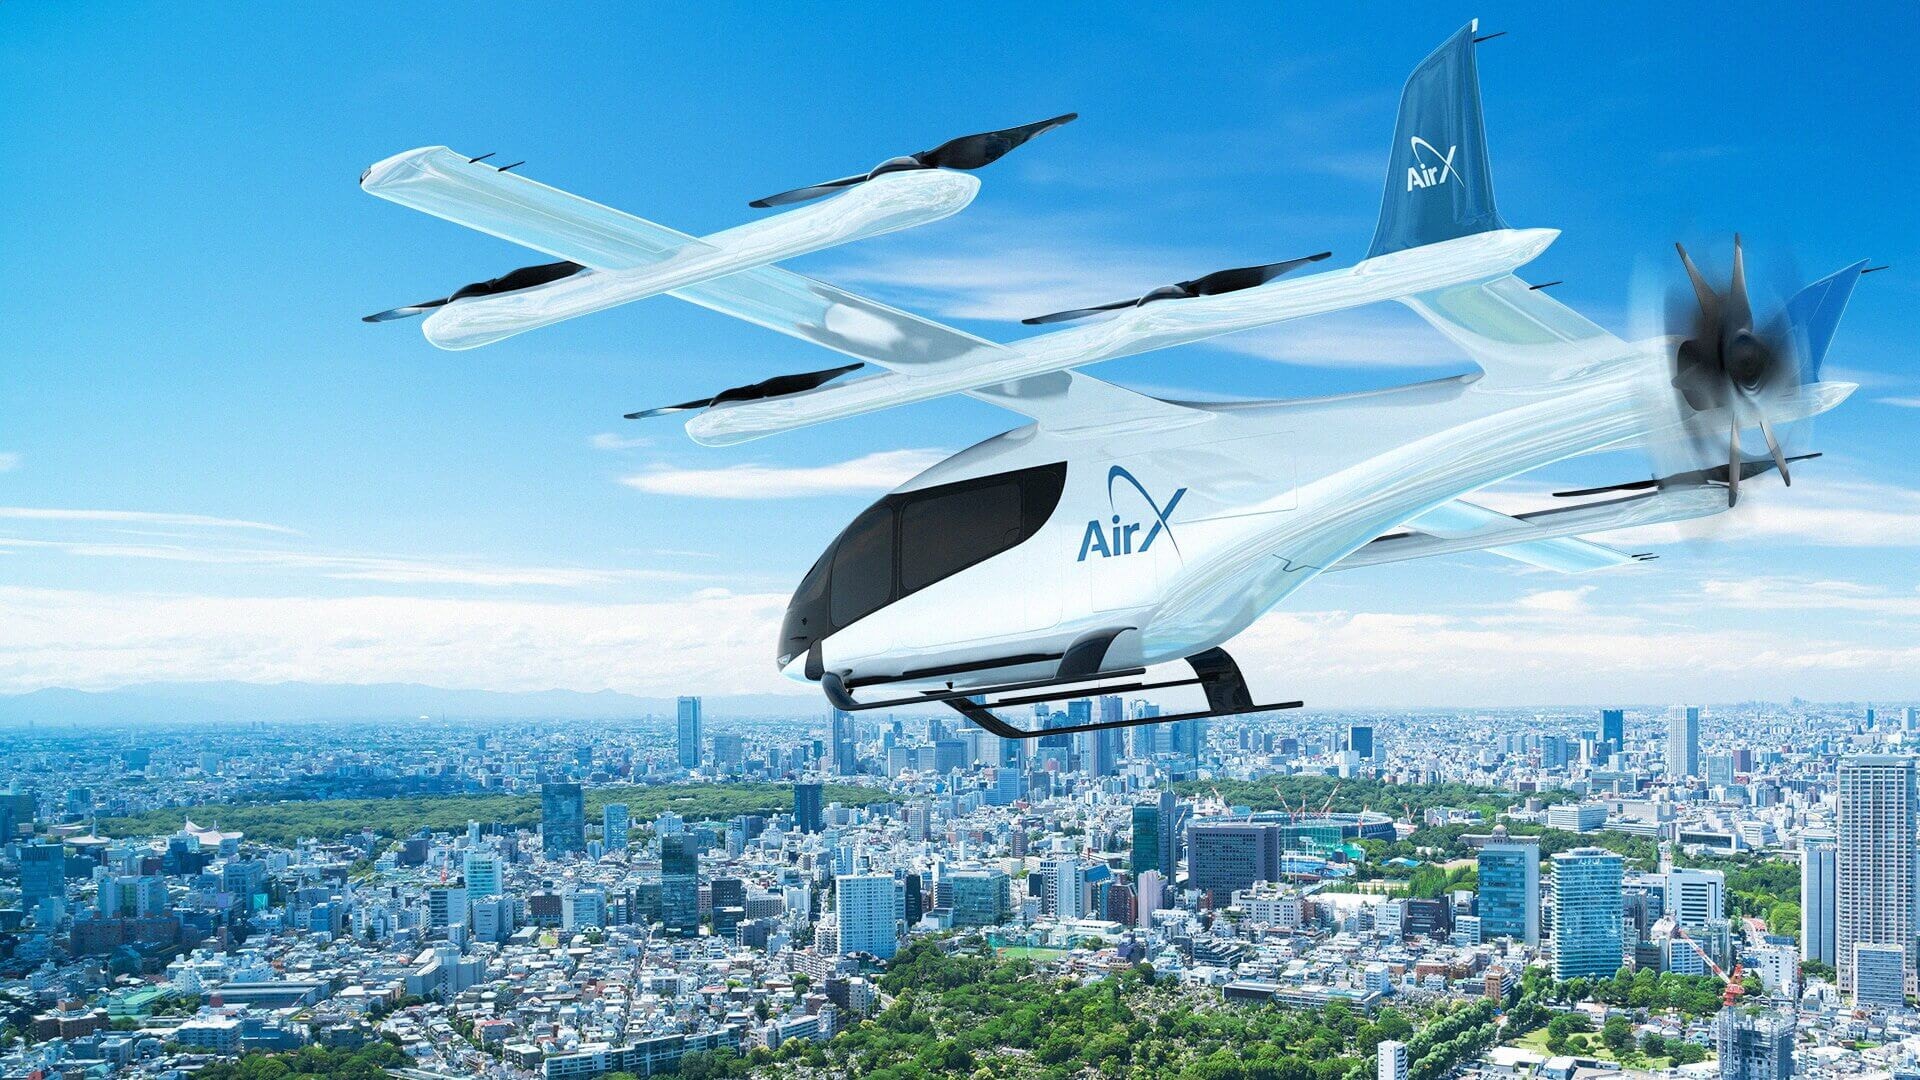 Japan’s Biggest Helicopter Charter Company to Operate 50 Electric Air Taxis